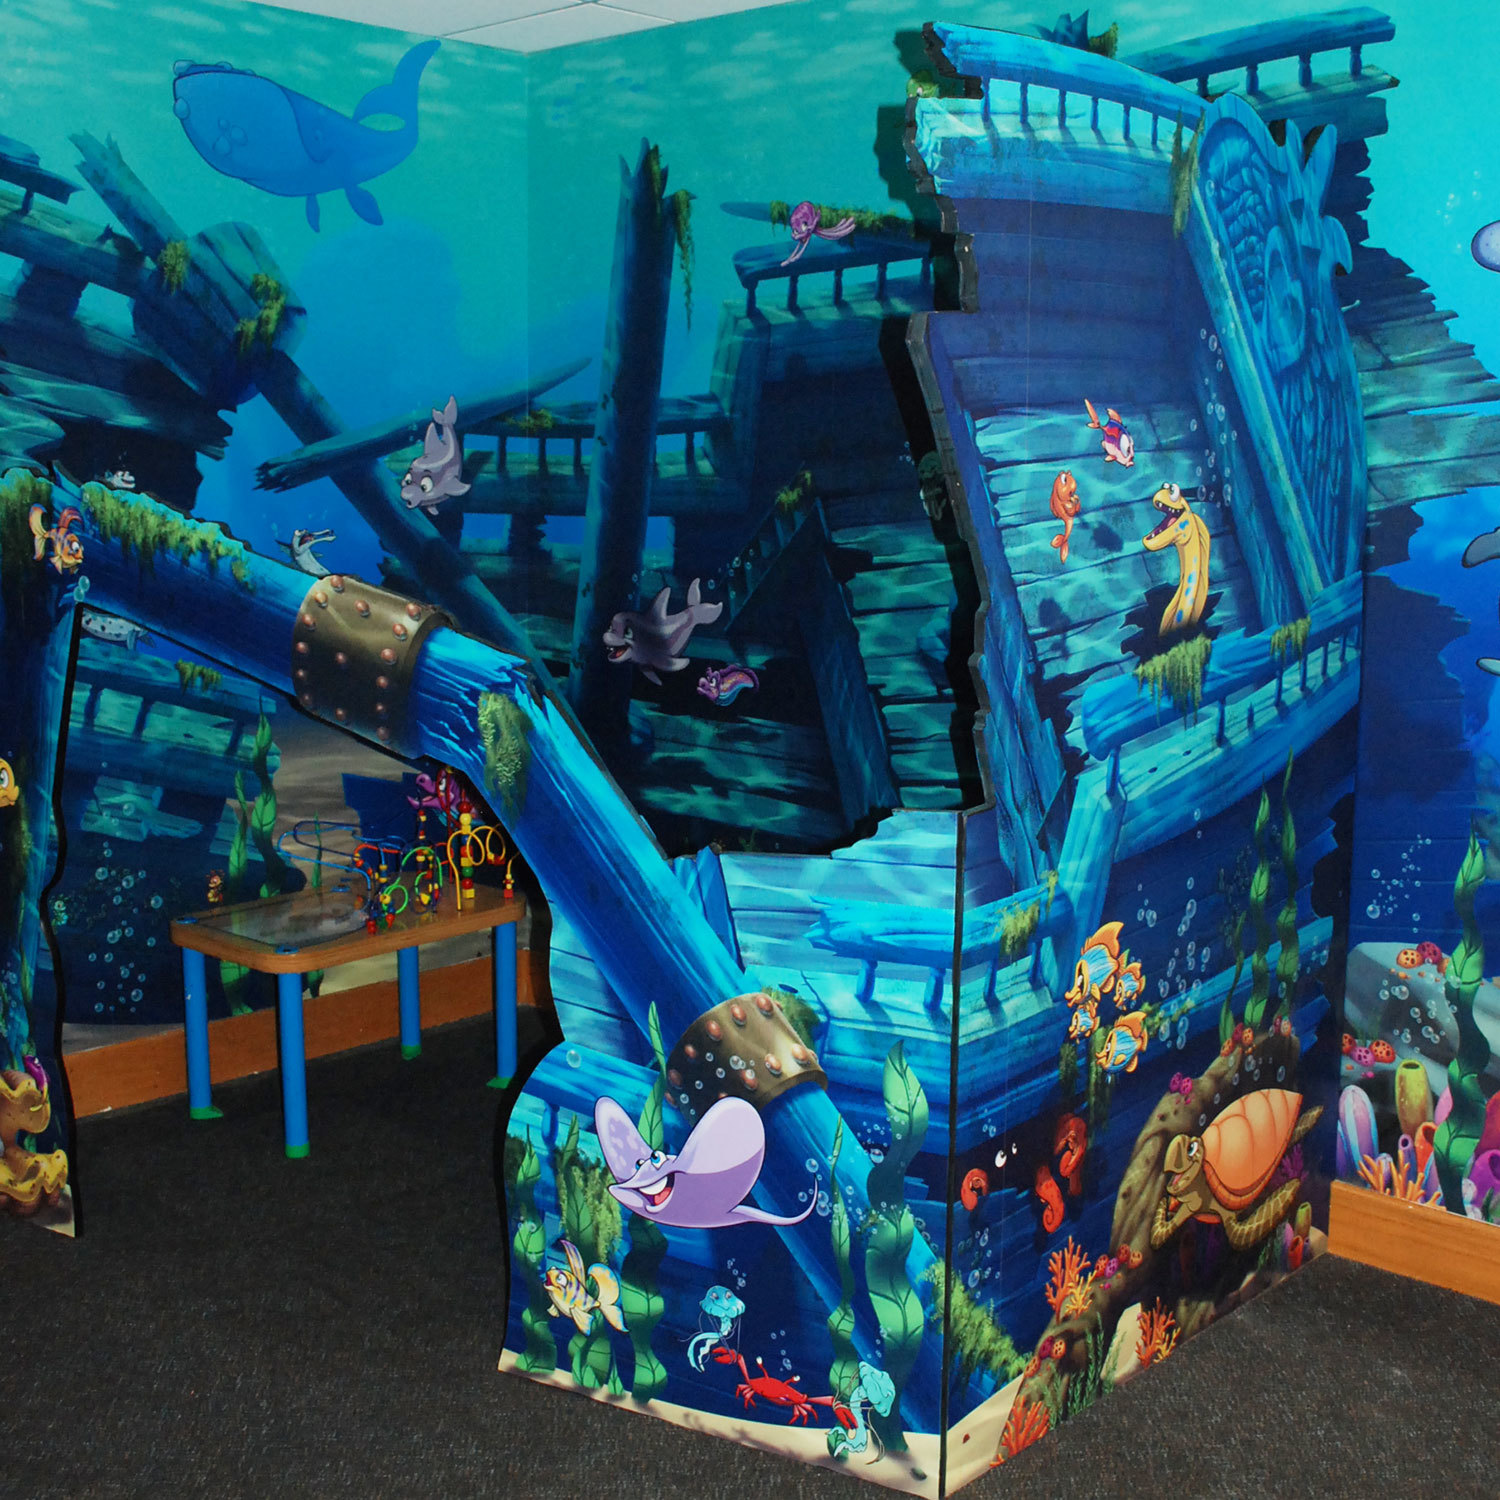 Wrecked Ship Play Area Created with 2D Cutouts at Florida Hospital